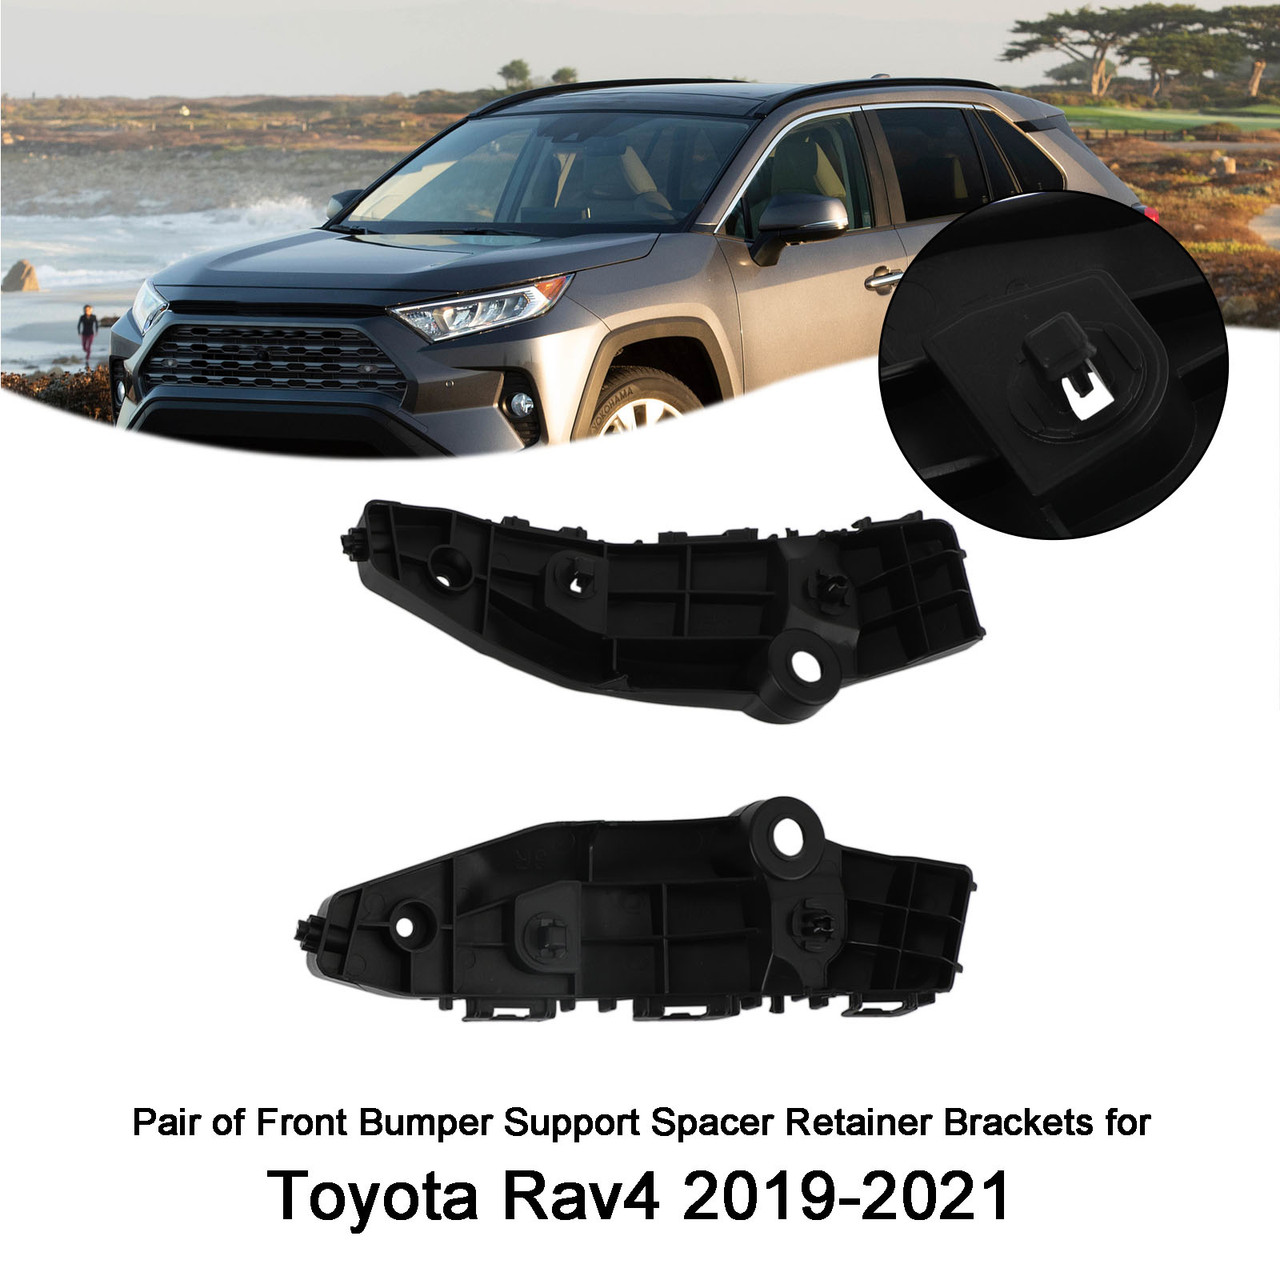 Pair of Front Bumper Support Spacer Retainer Brackets for Toyota Rav4 2019-2021